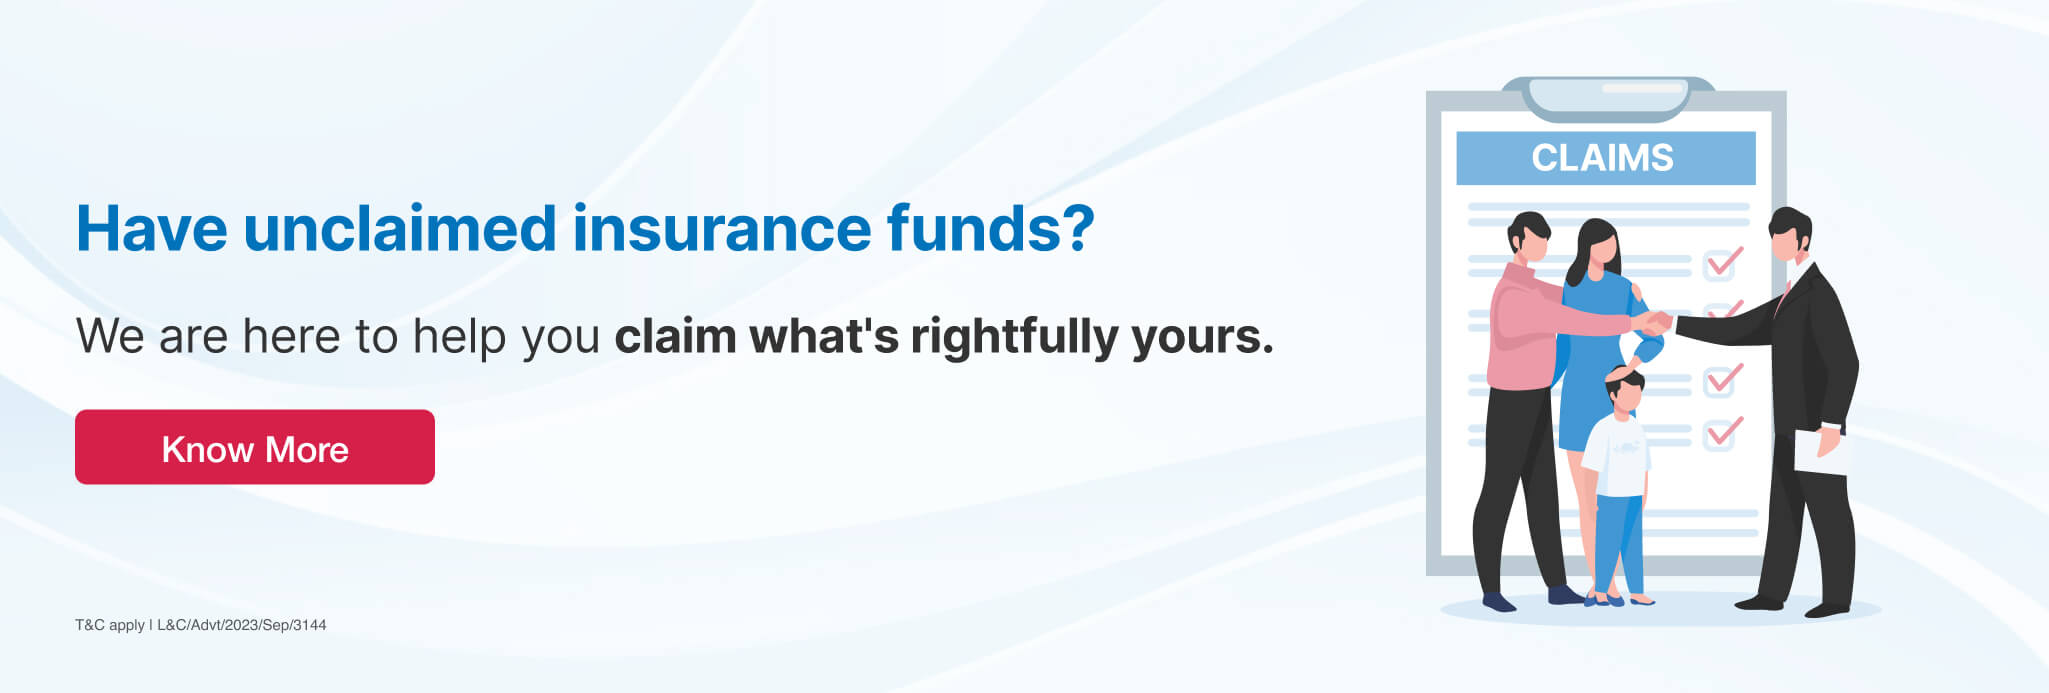 Unclaimed Insurance Funds